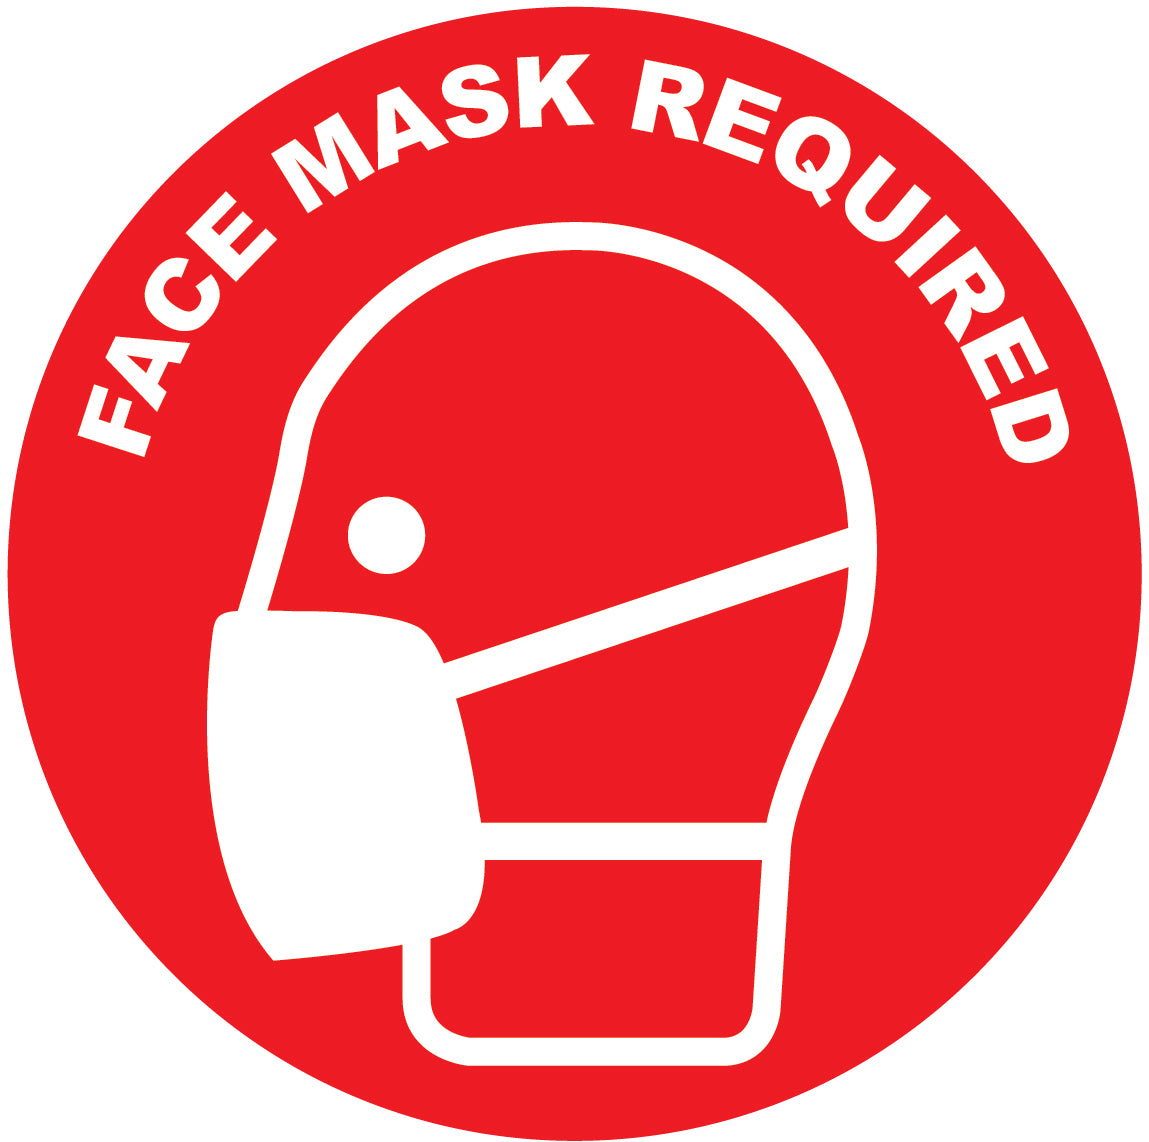 Face Mask Required Symbol Red Decal